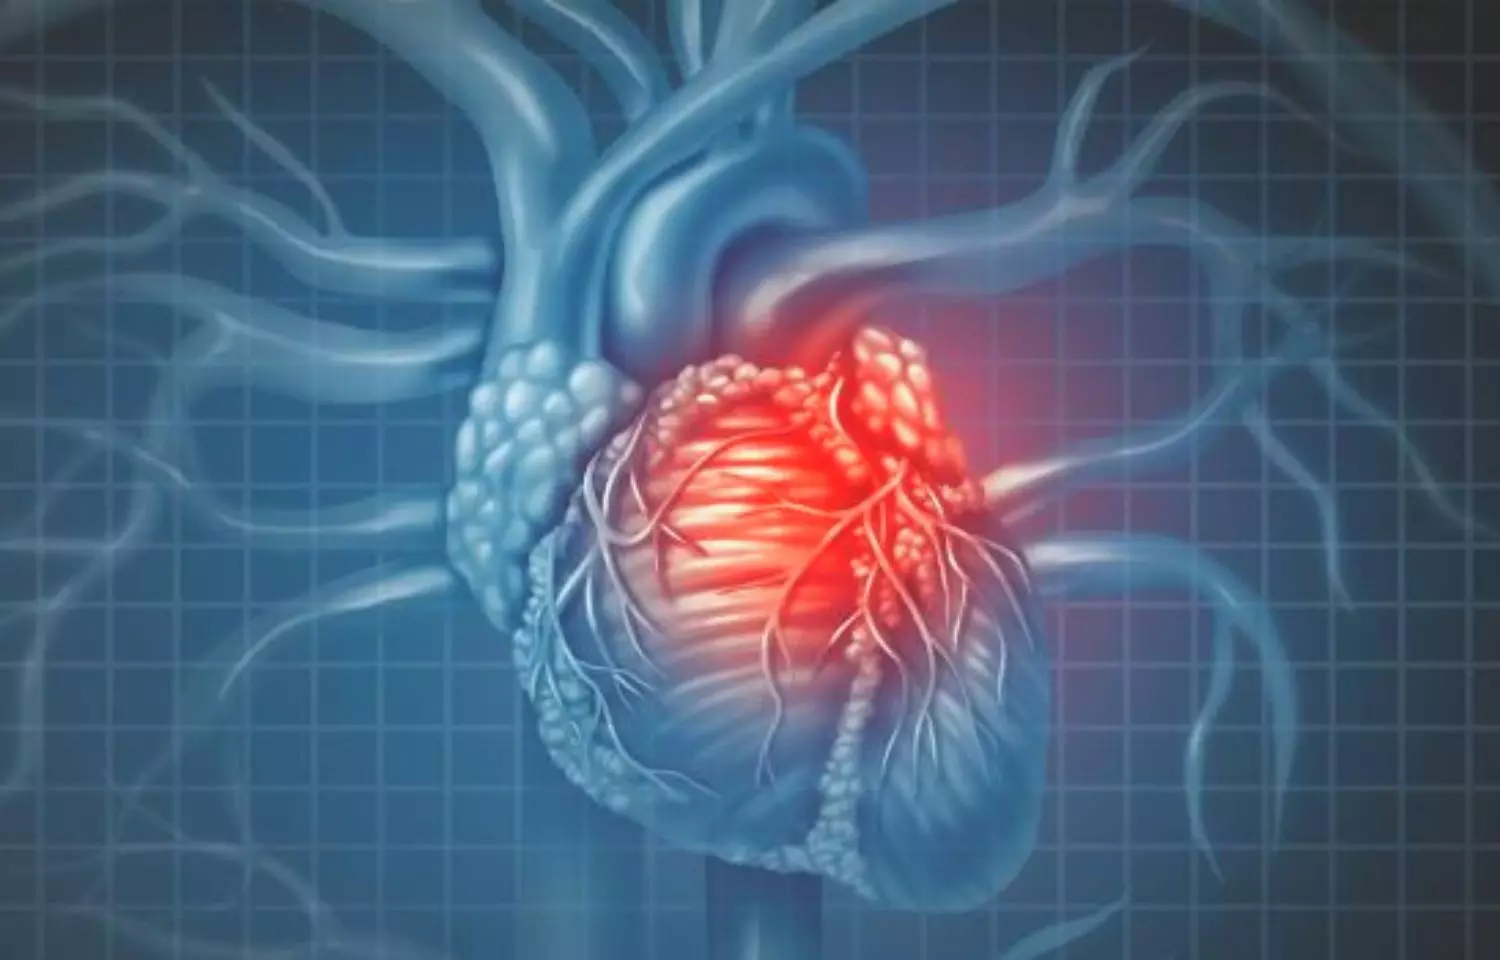 Invasive management of chronic coronary disease not tied to QoL benefit in patients with CKD